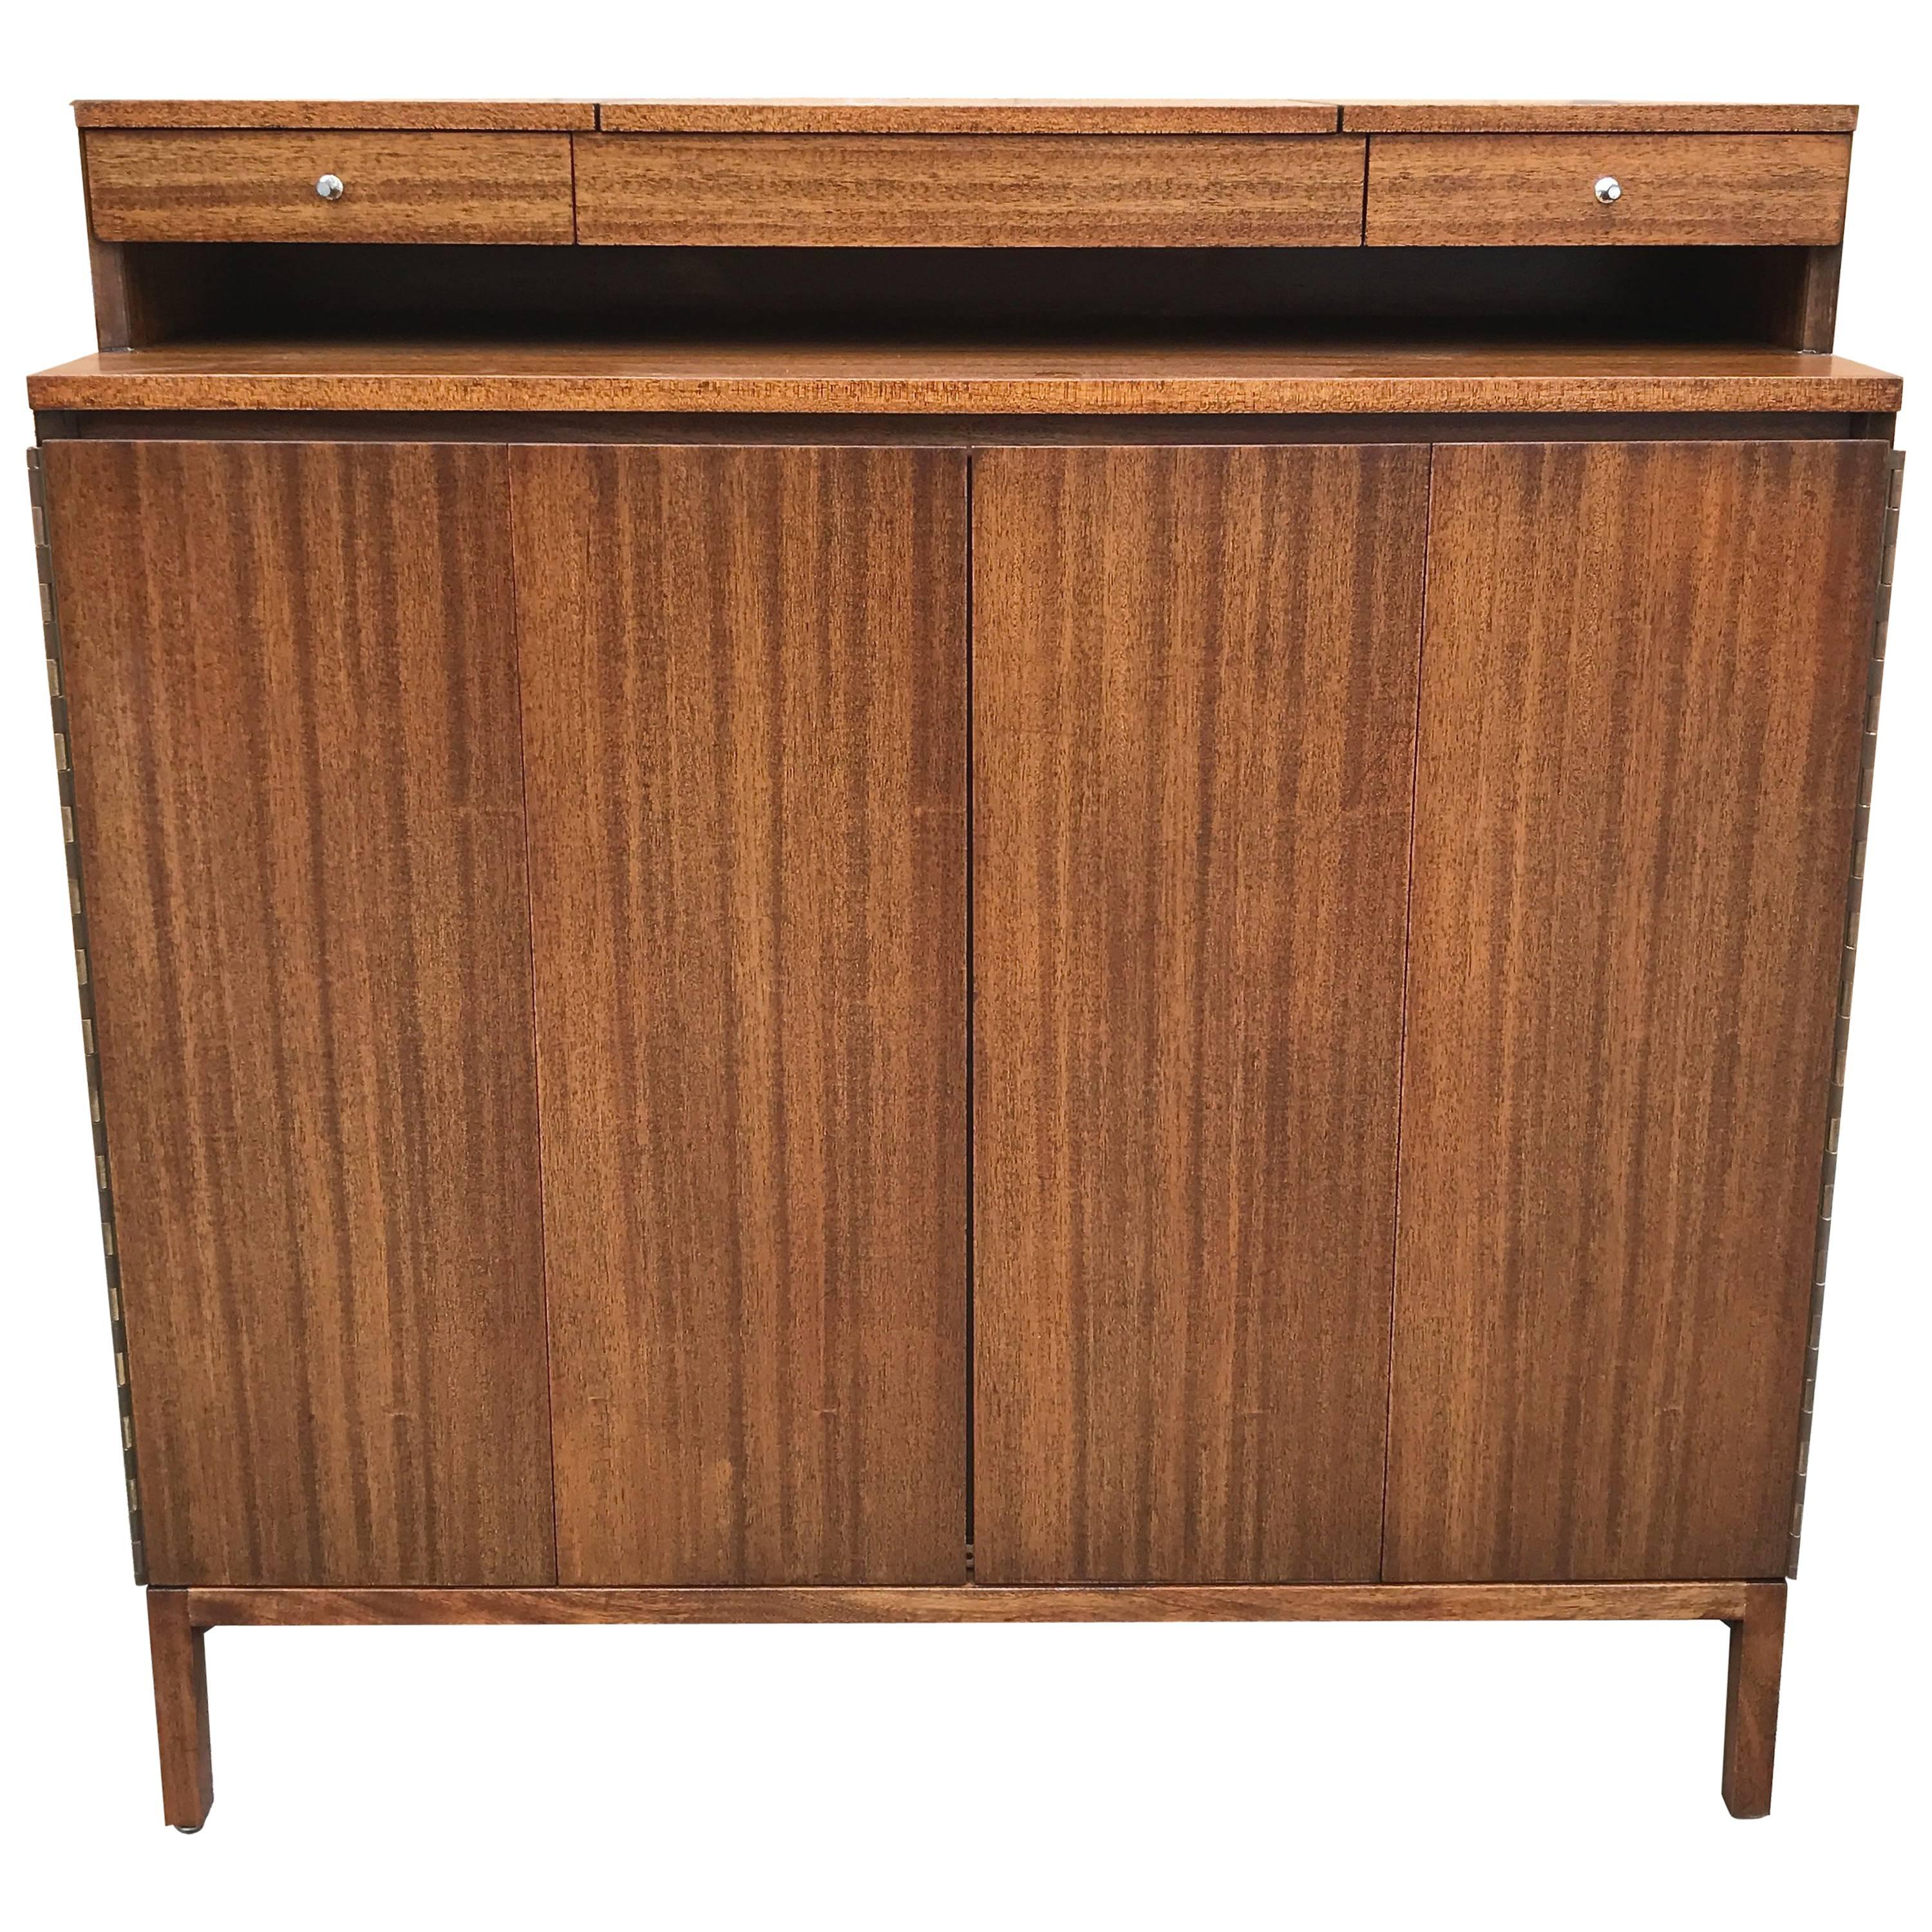 Tall Gentleman's Chest Dresser by Paul McCobb for Calvin the Irwin Collection